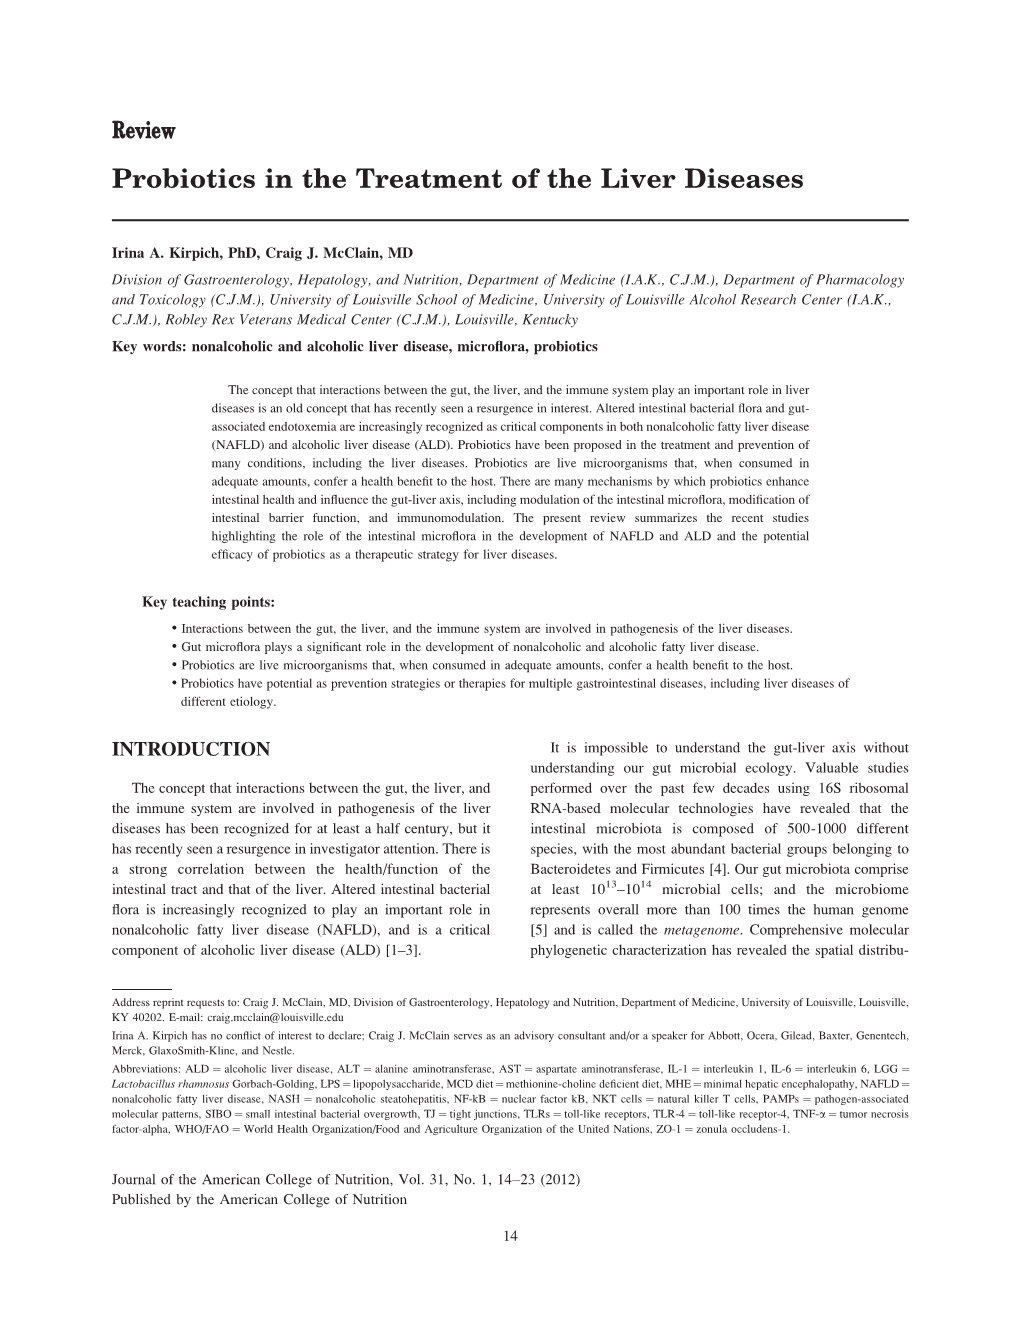 Probiotics in the Treatment of the Liver Diseases